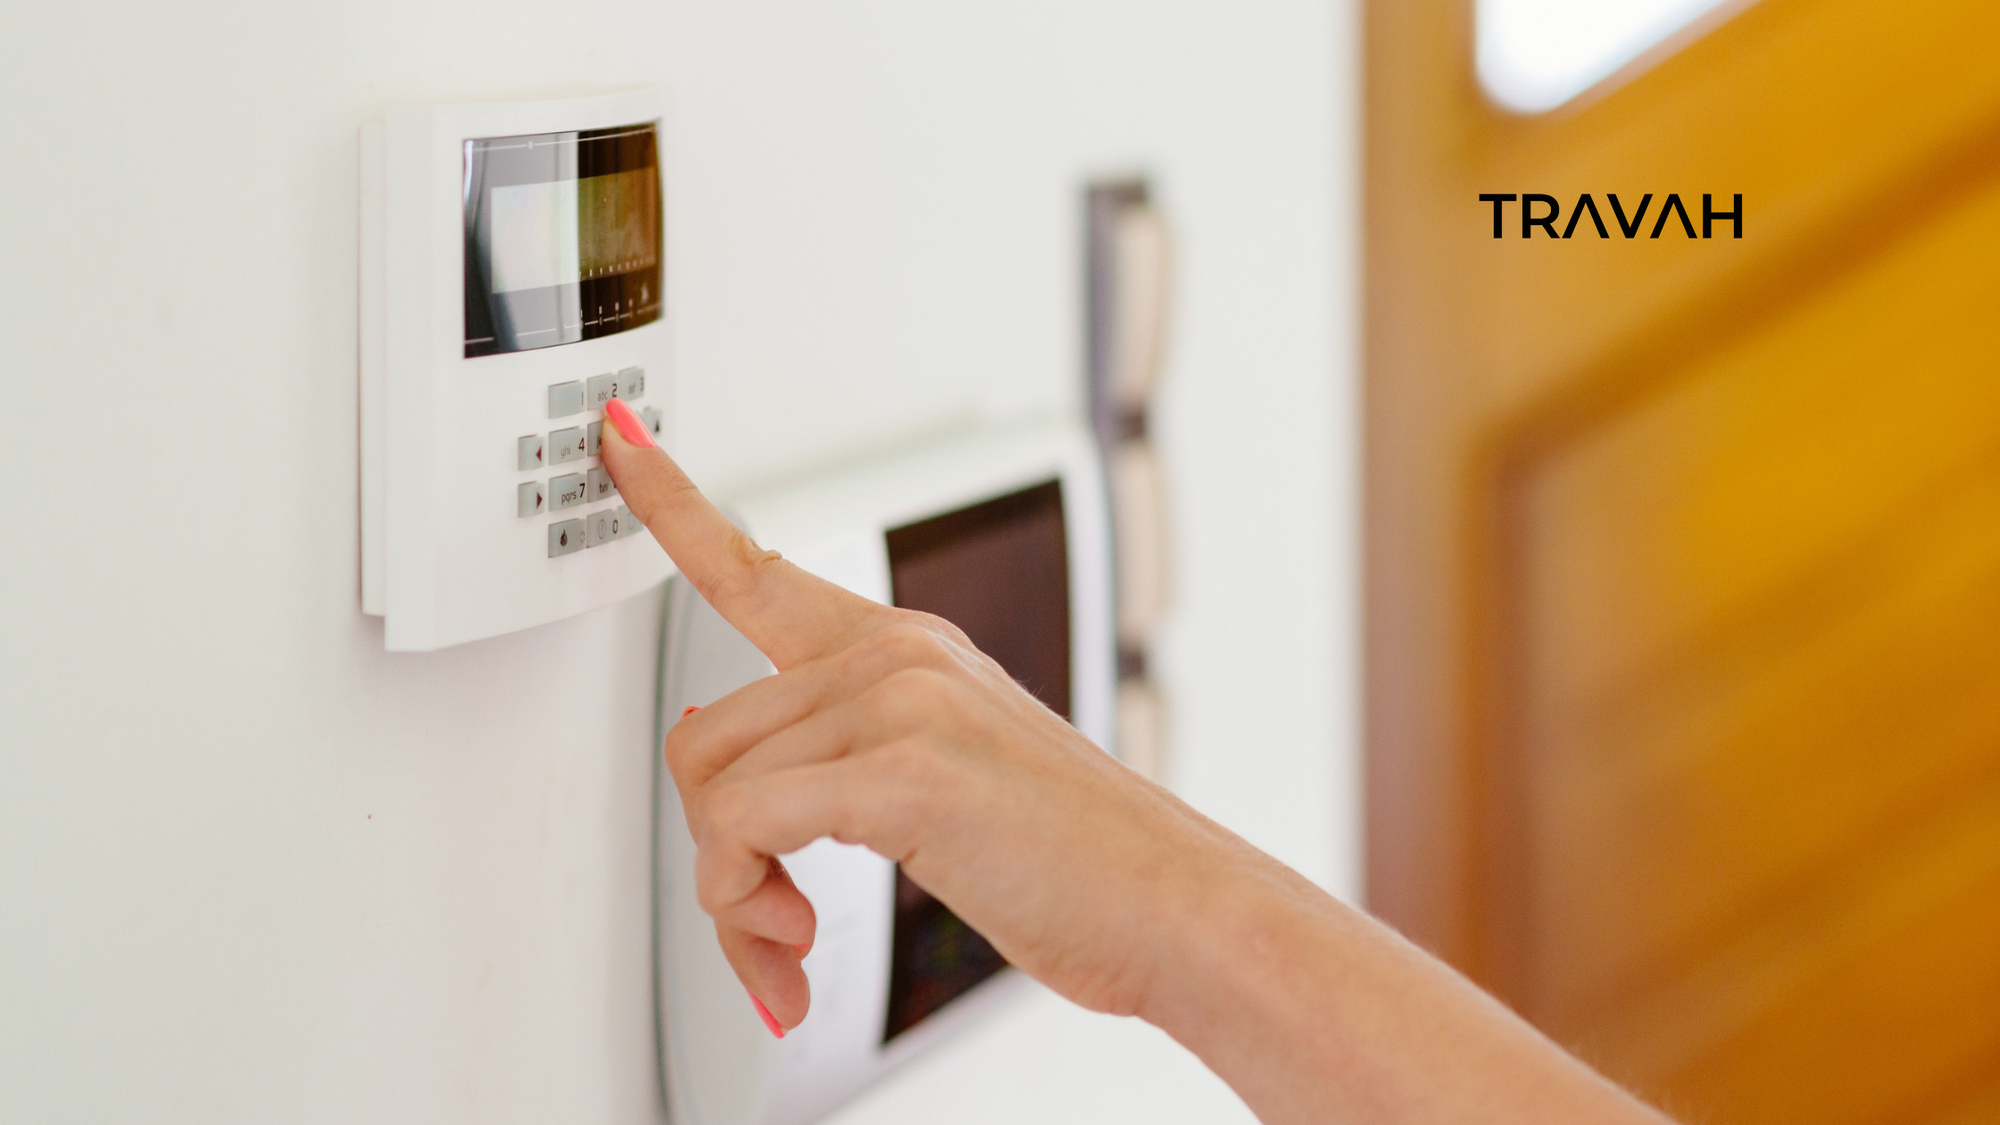 hand pressing buttons on alarm security system in house